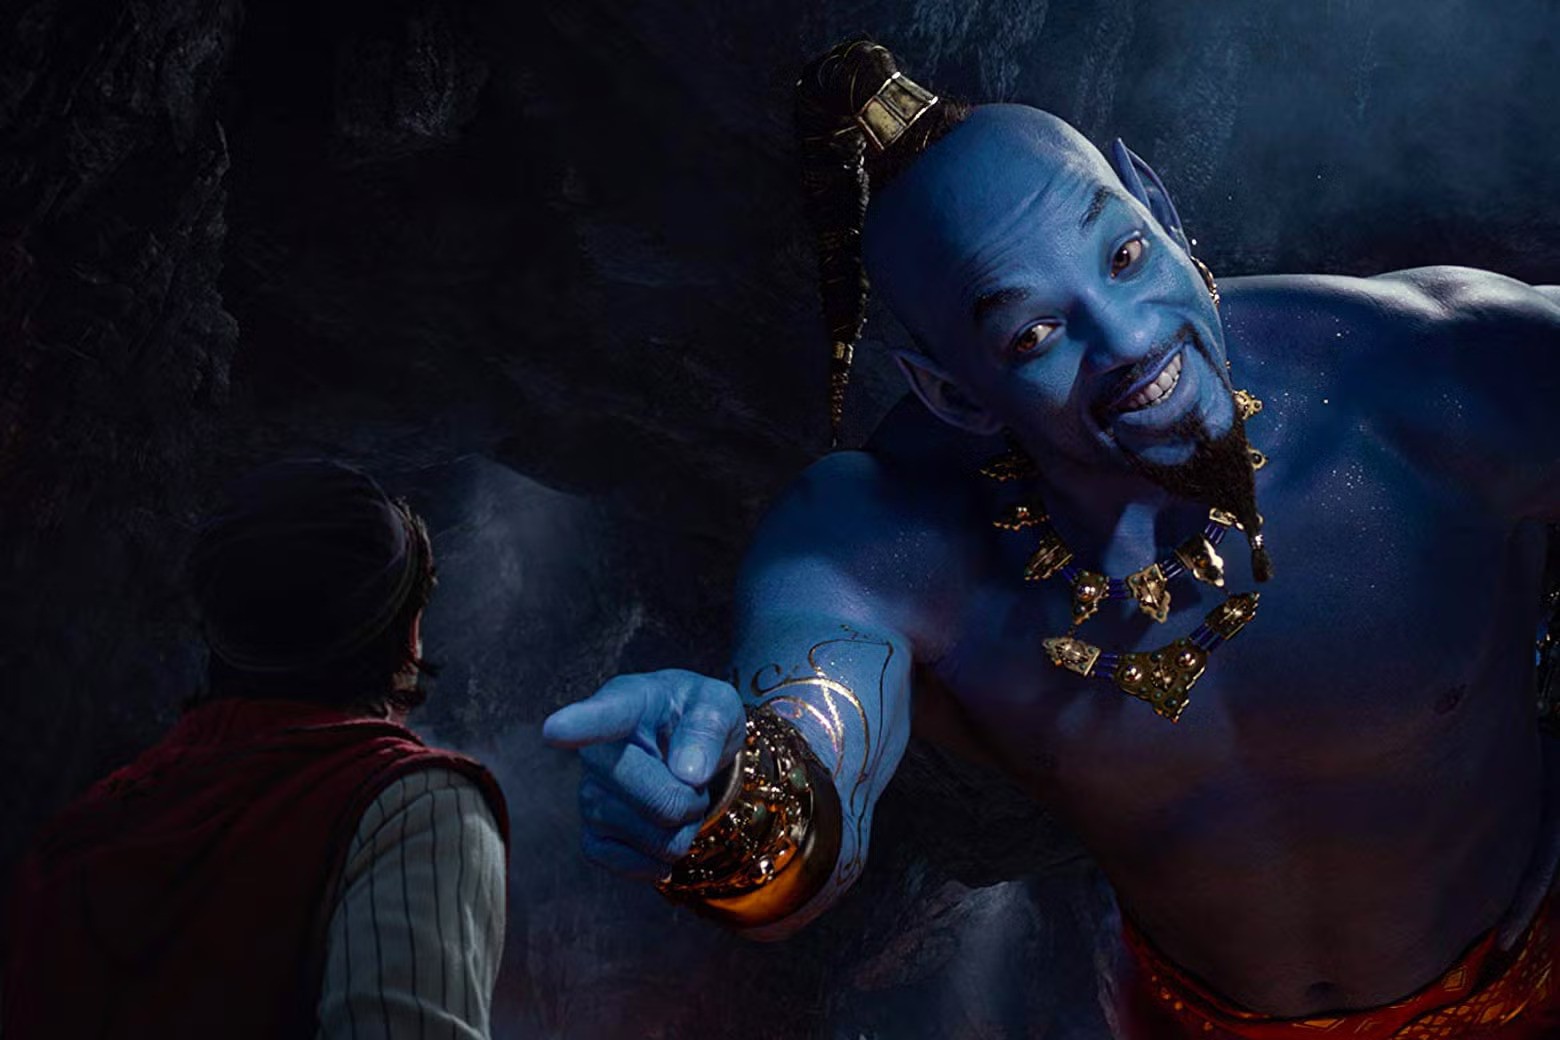 Will Smith as the Genie in Aladdin [Credit: Walt Disney Studios Motion Pictures]